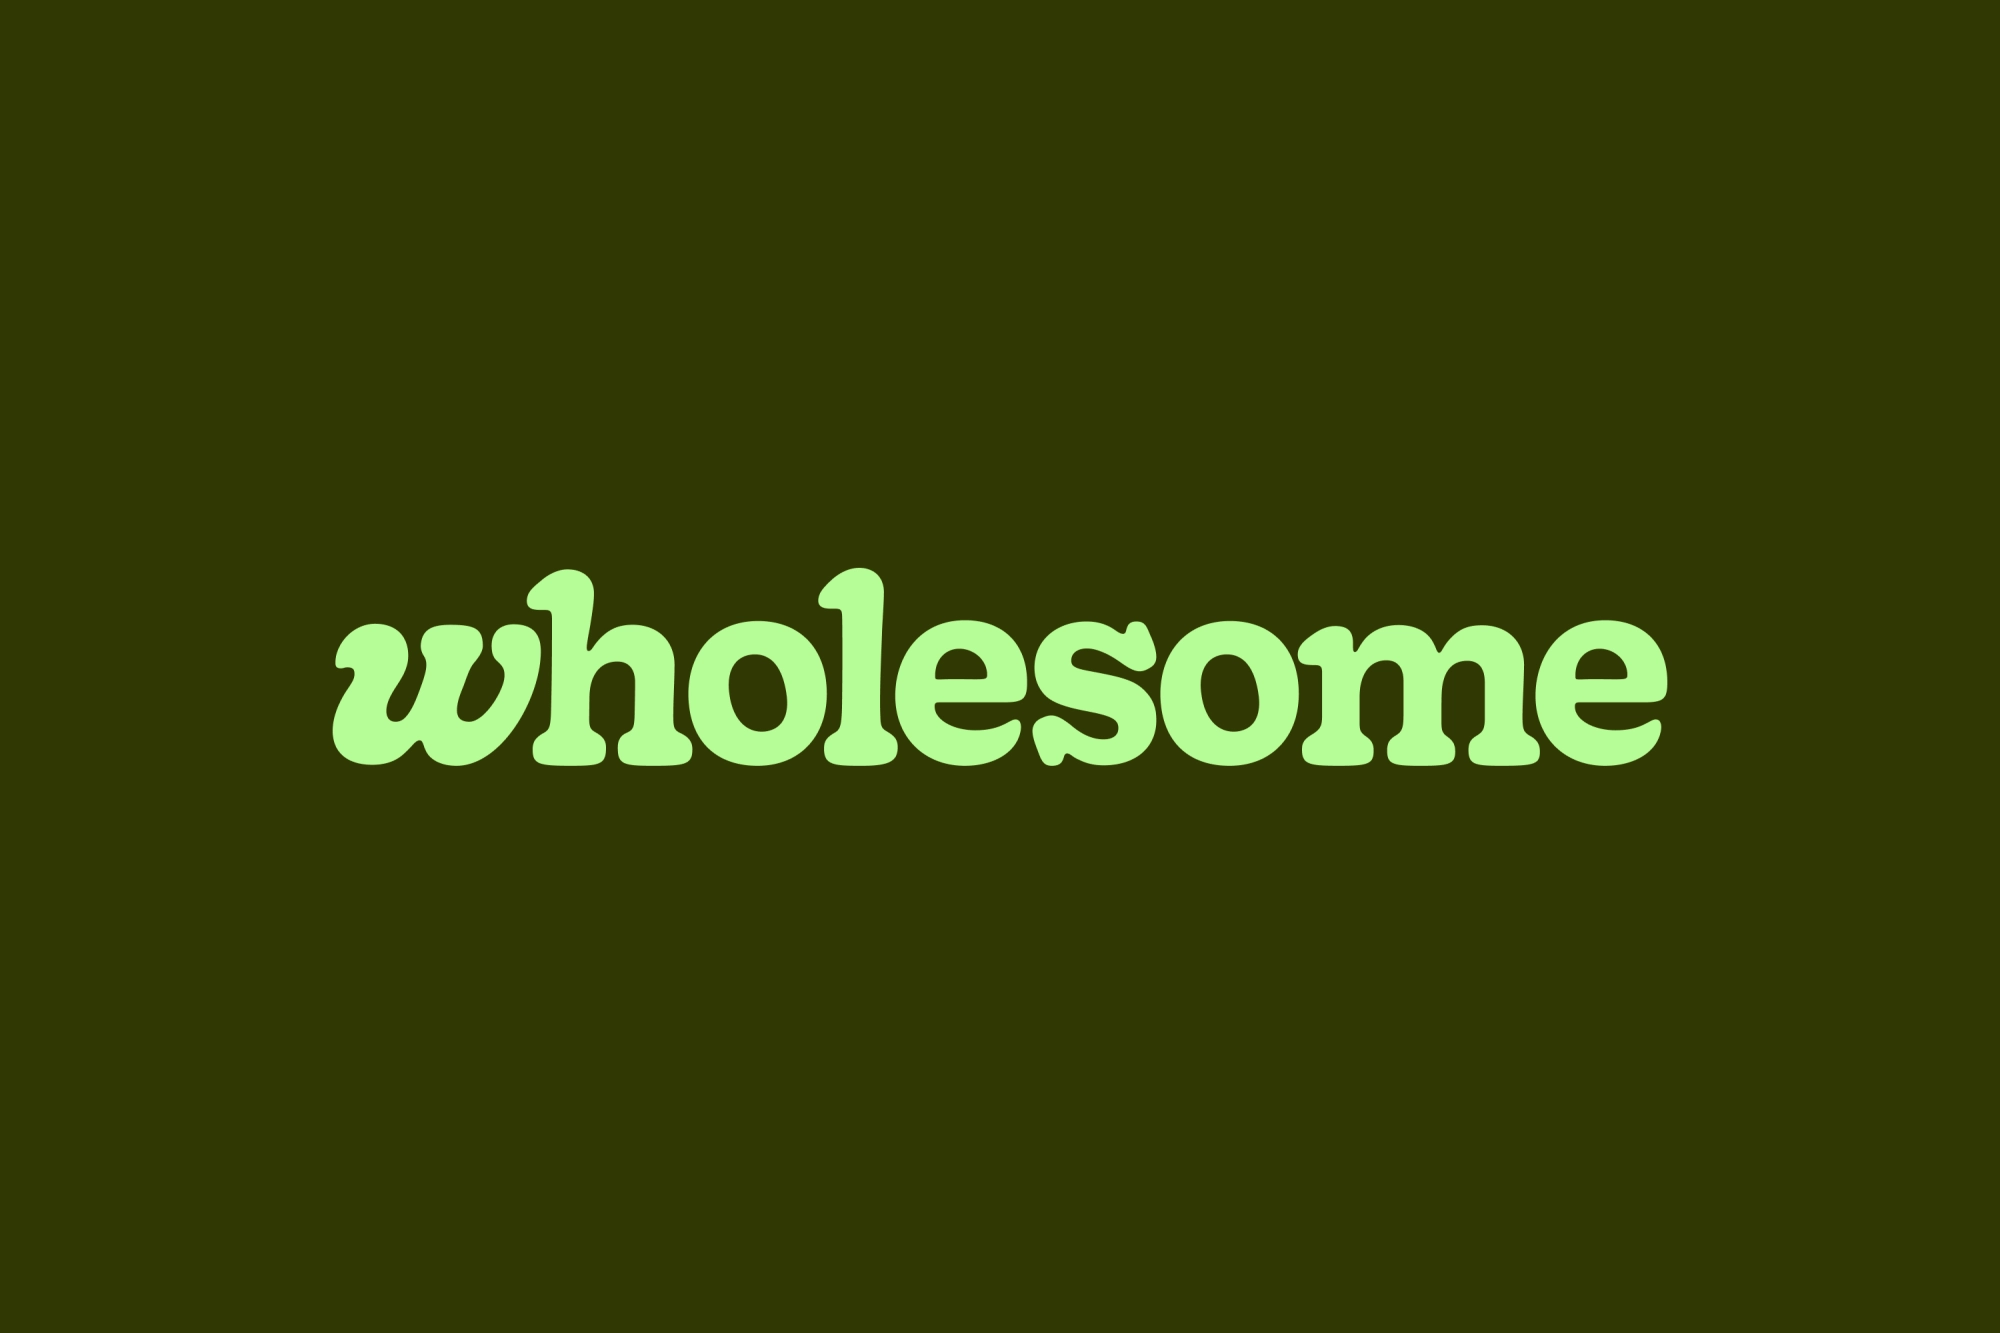 Custom logotype for Australian online grocer Wholesome designed by Universal Favourite